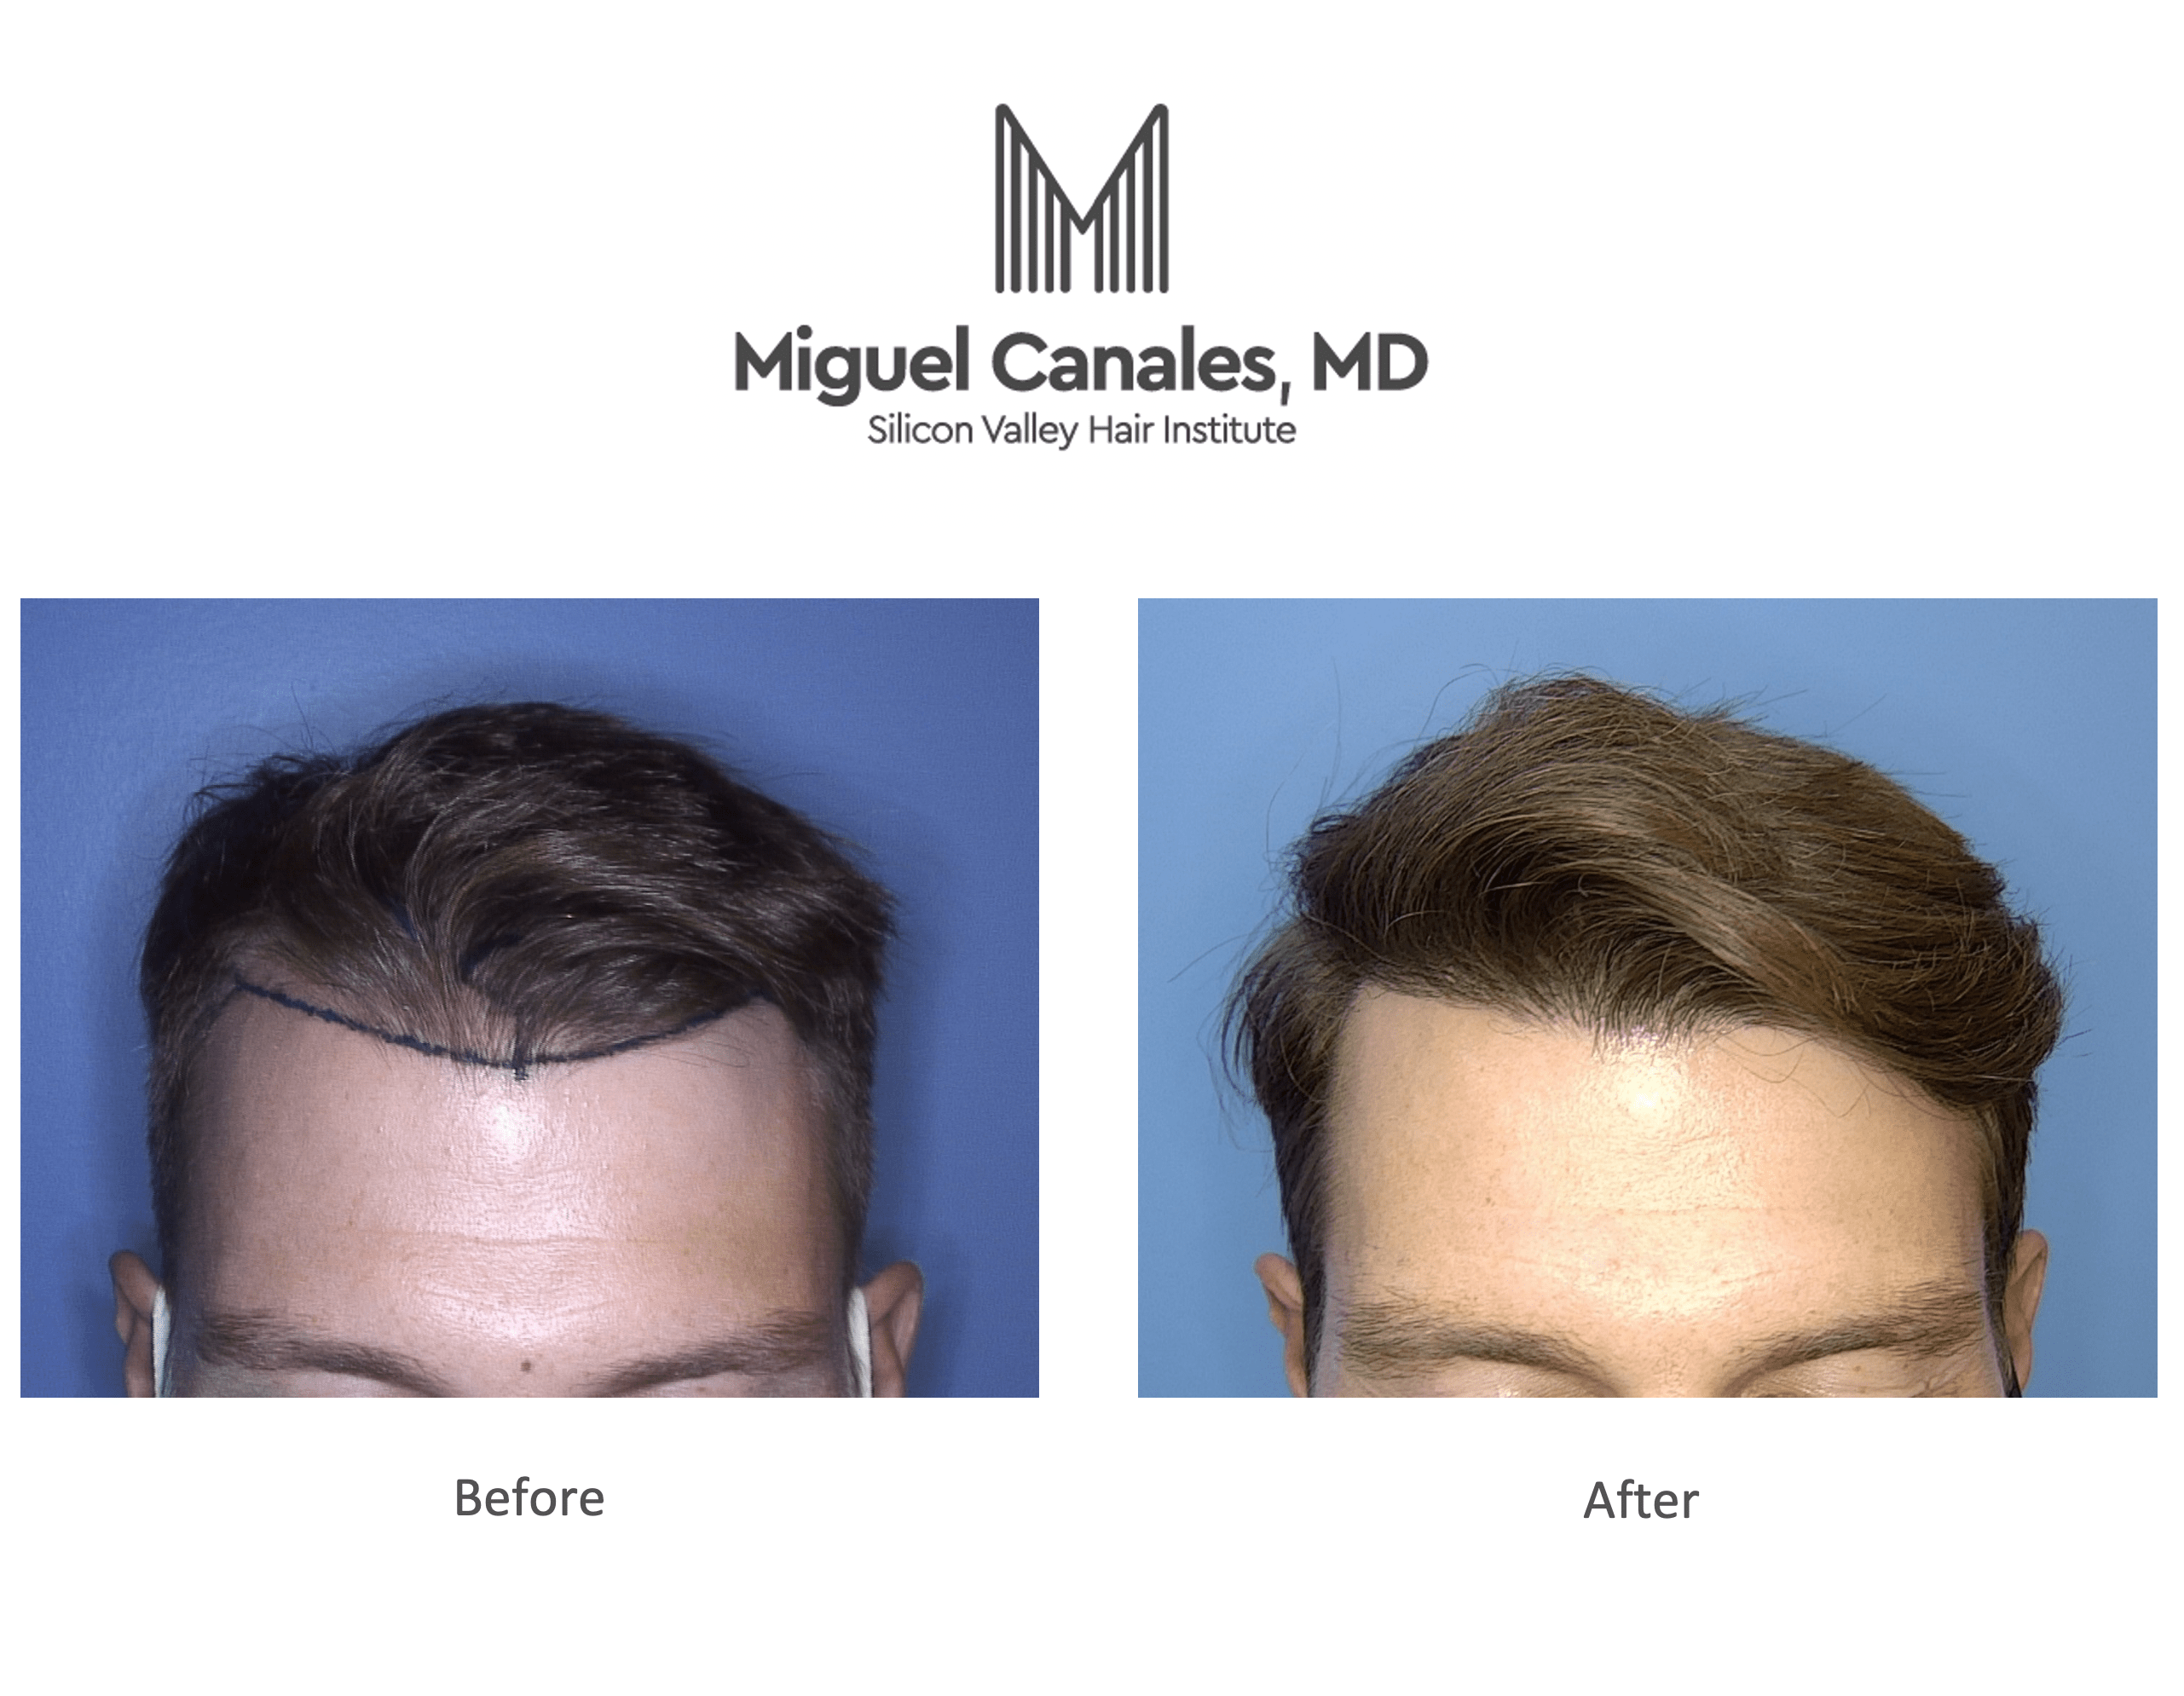 Many Men Become Bald as They Age, but a Hair Transplant Can Work Wonders -  Miguel Canales .